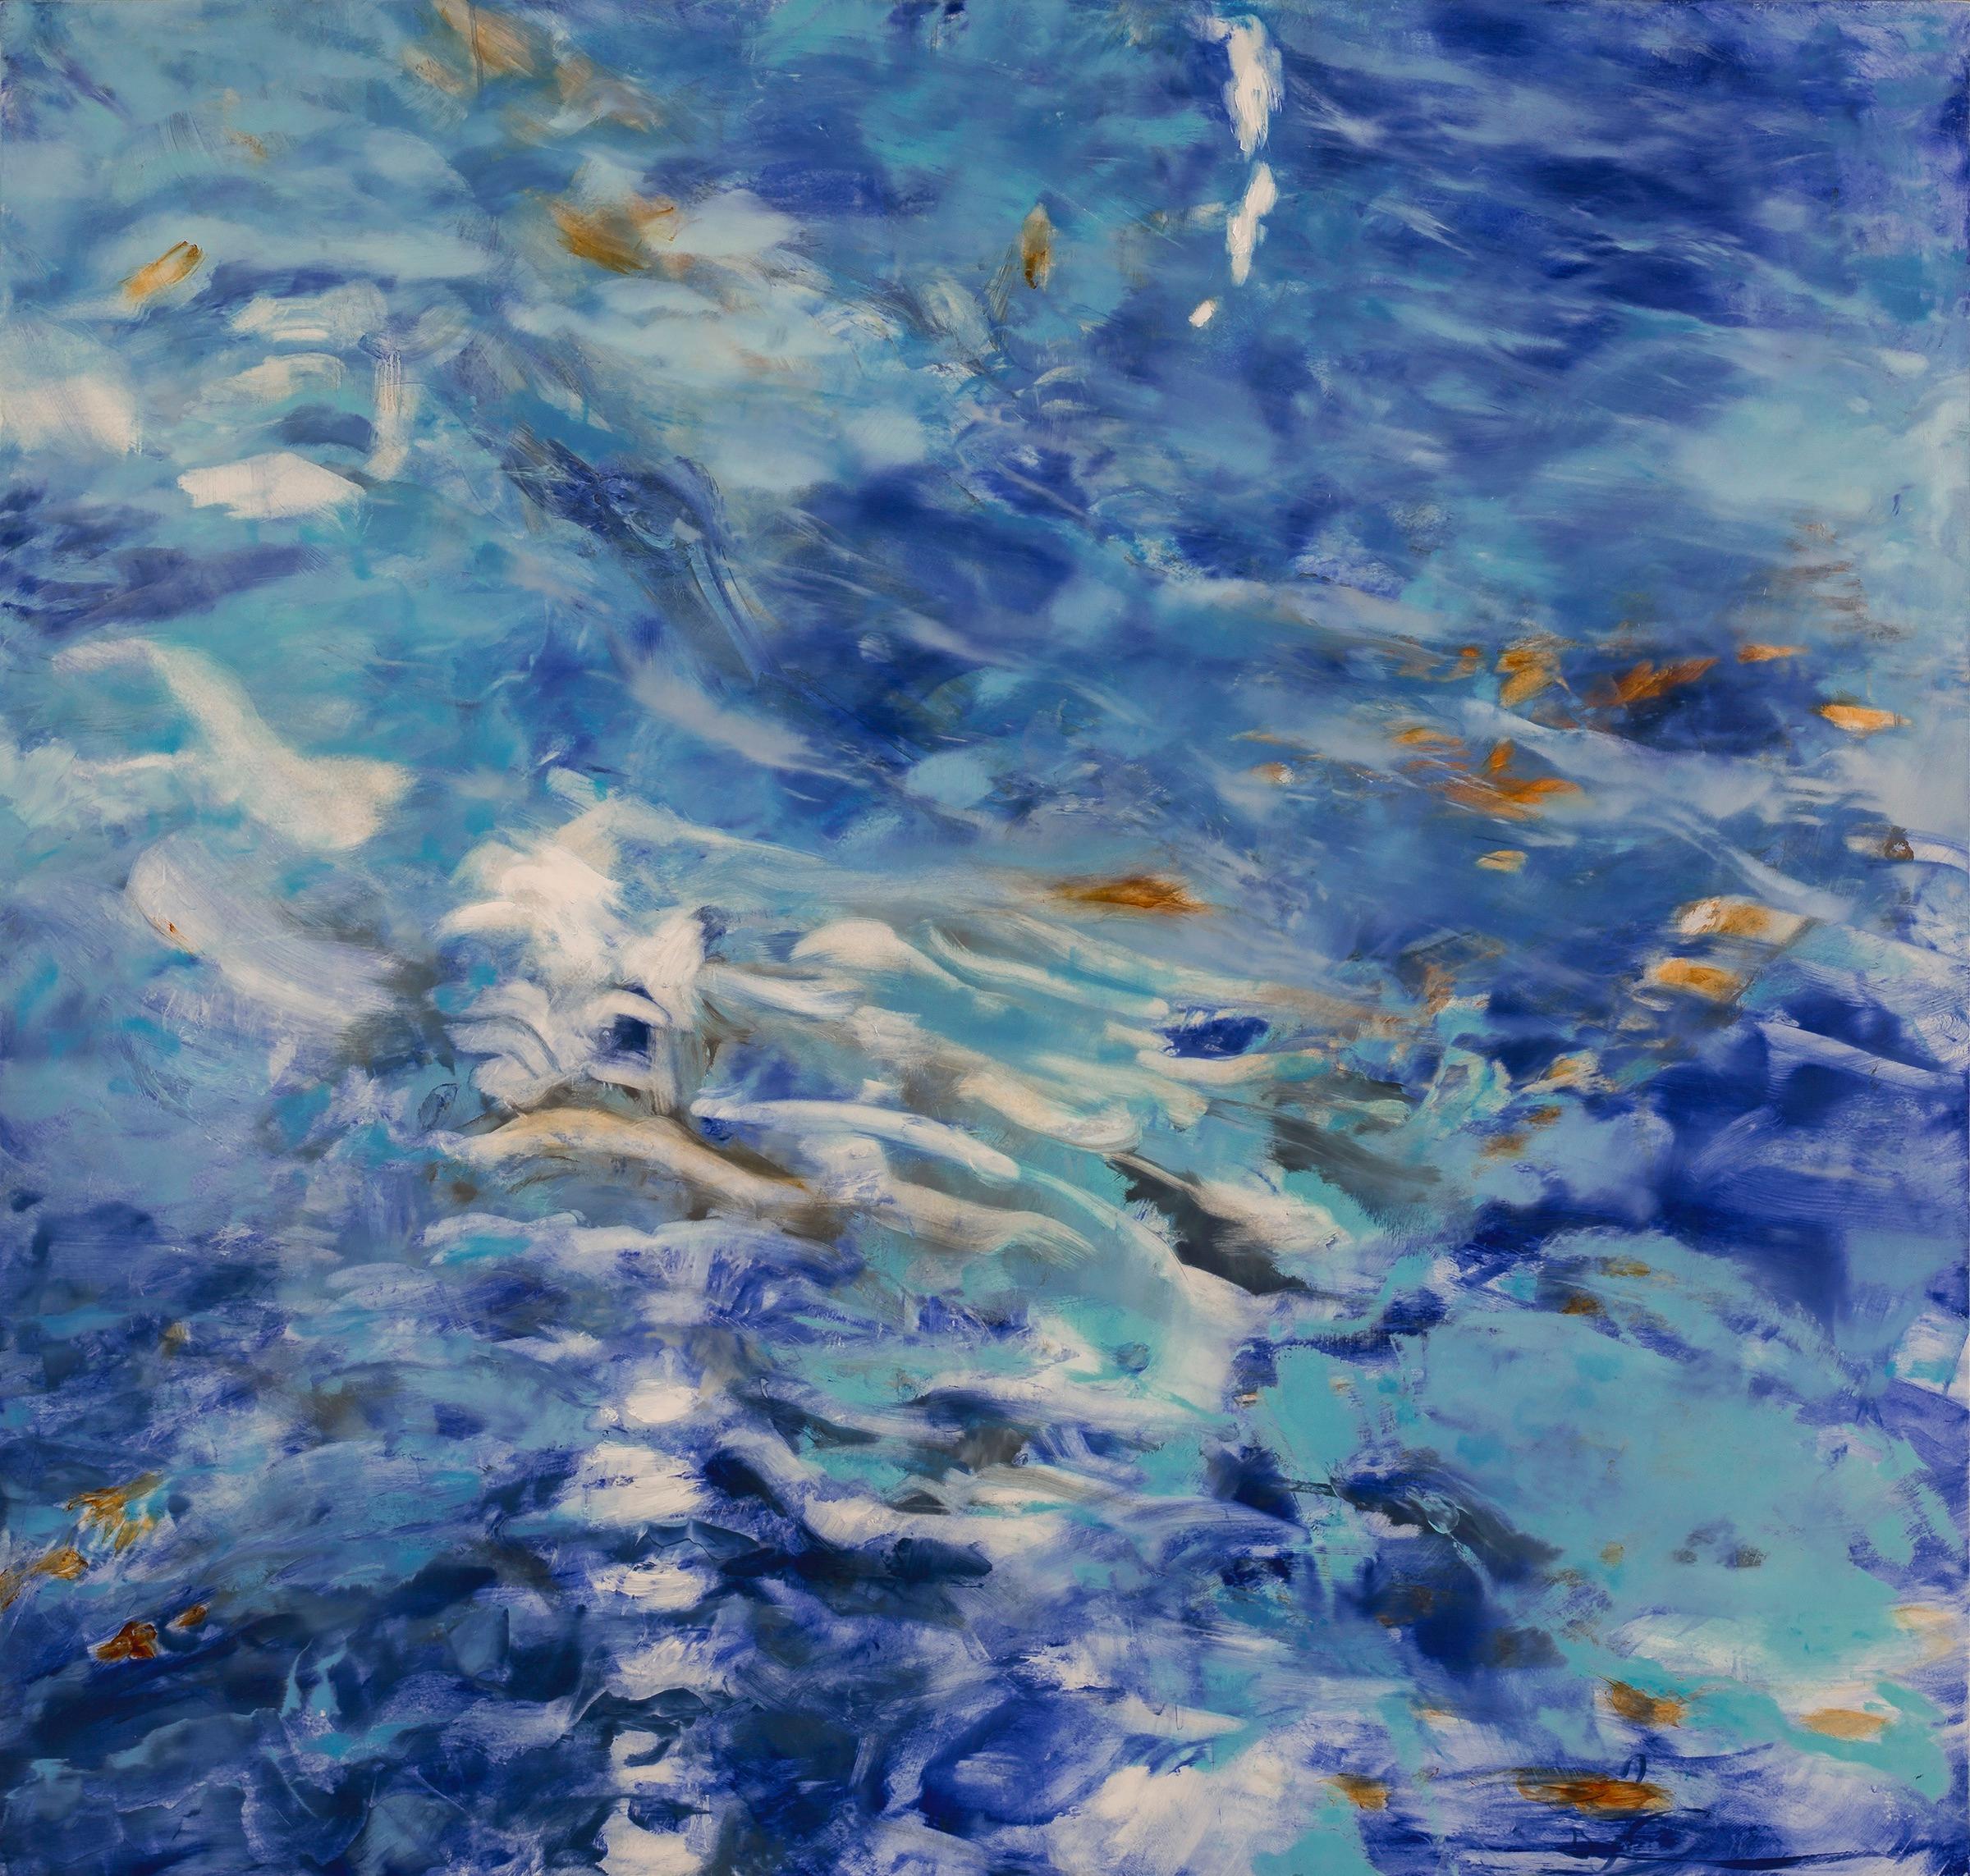 Living Oceans Maui No. 1 / abstract expressionism ocean scene